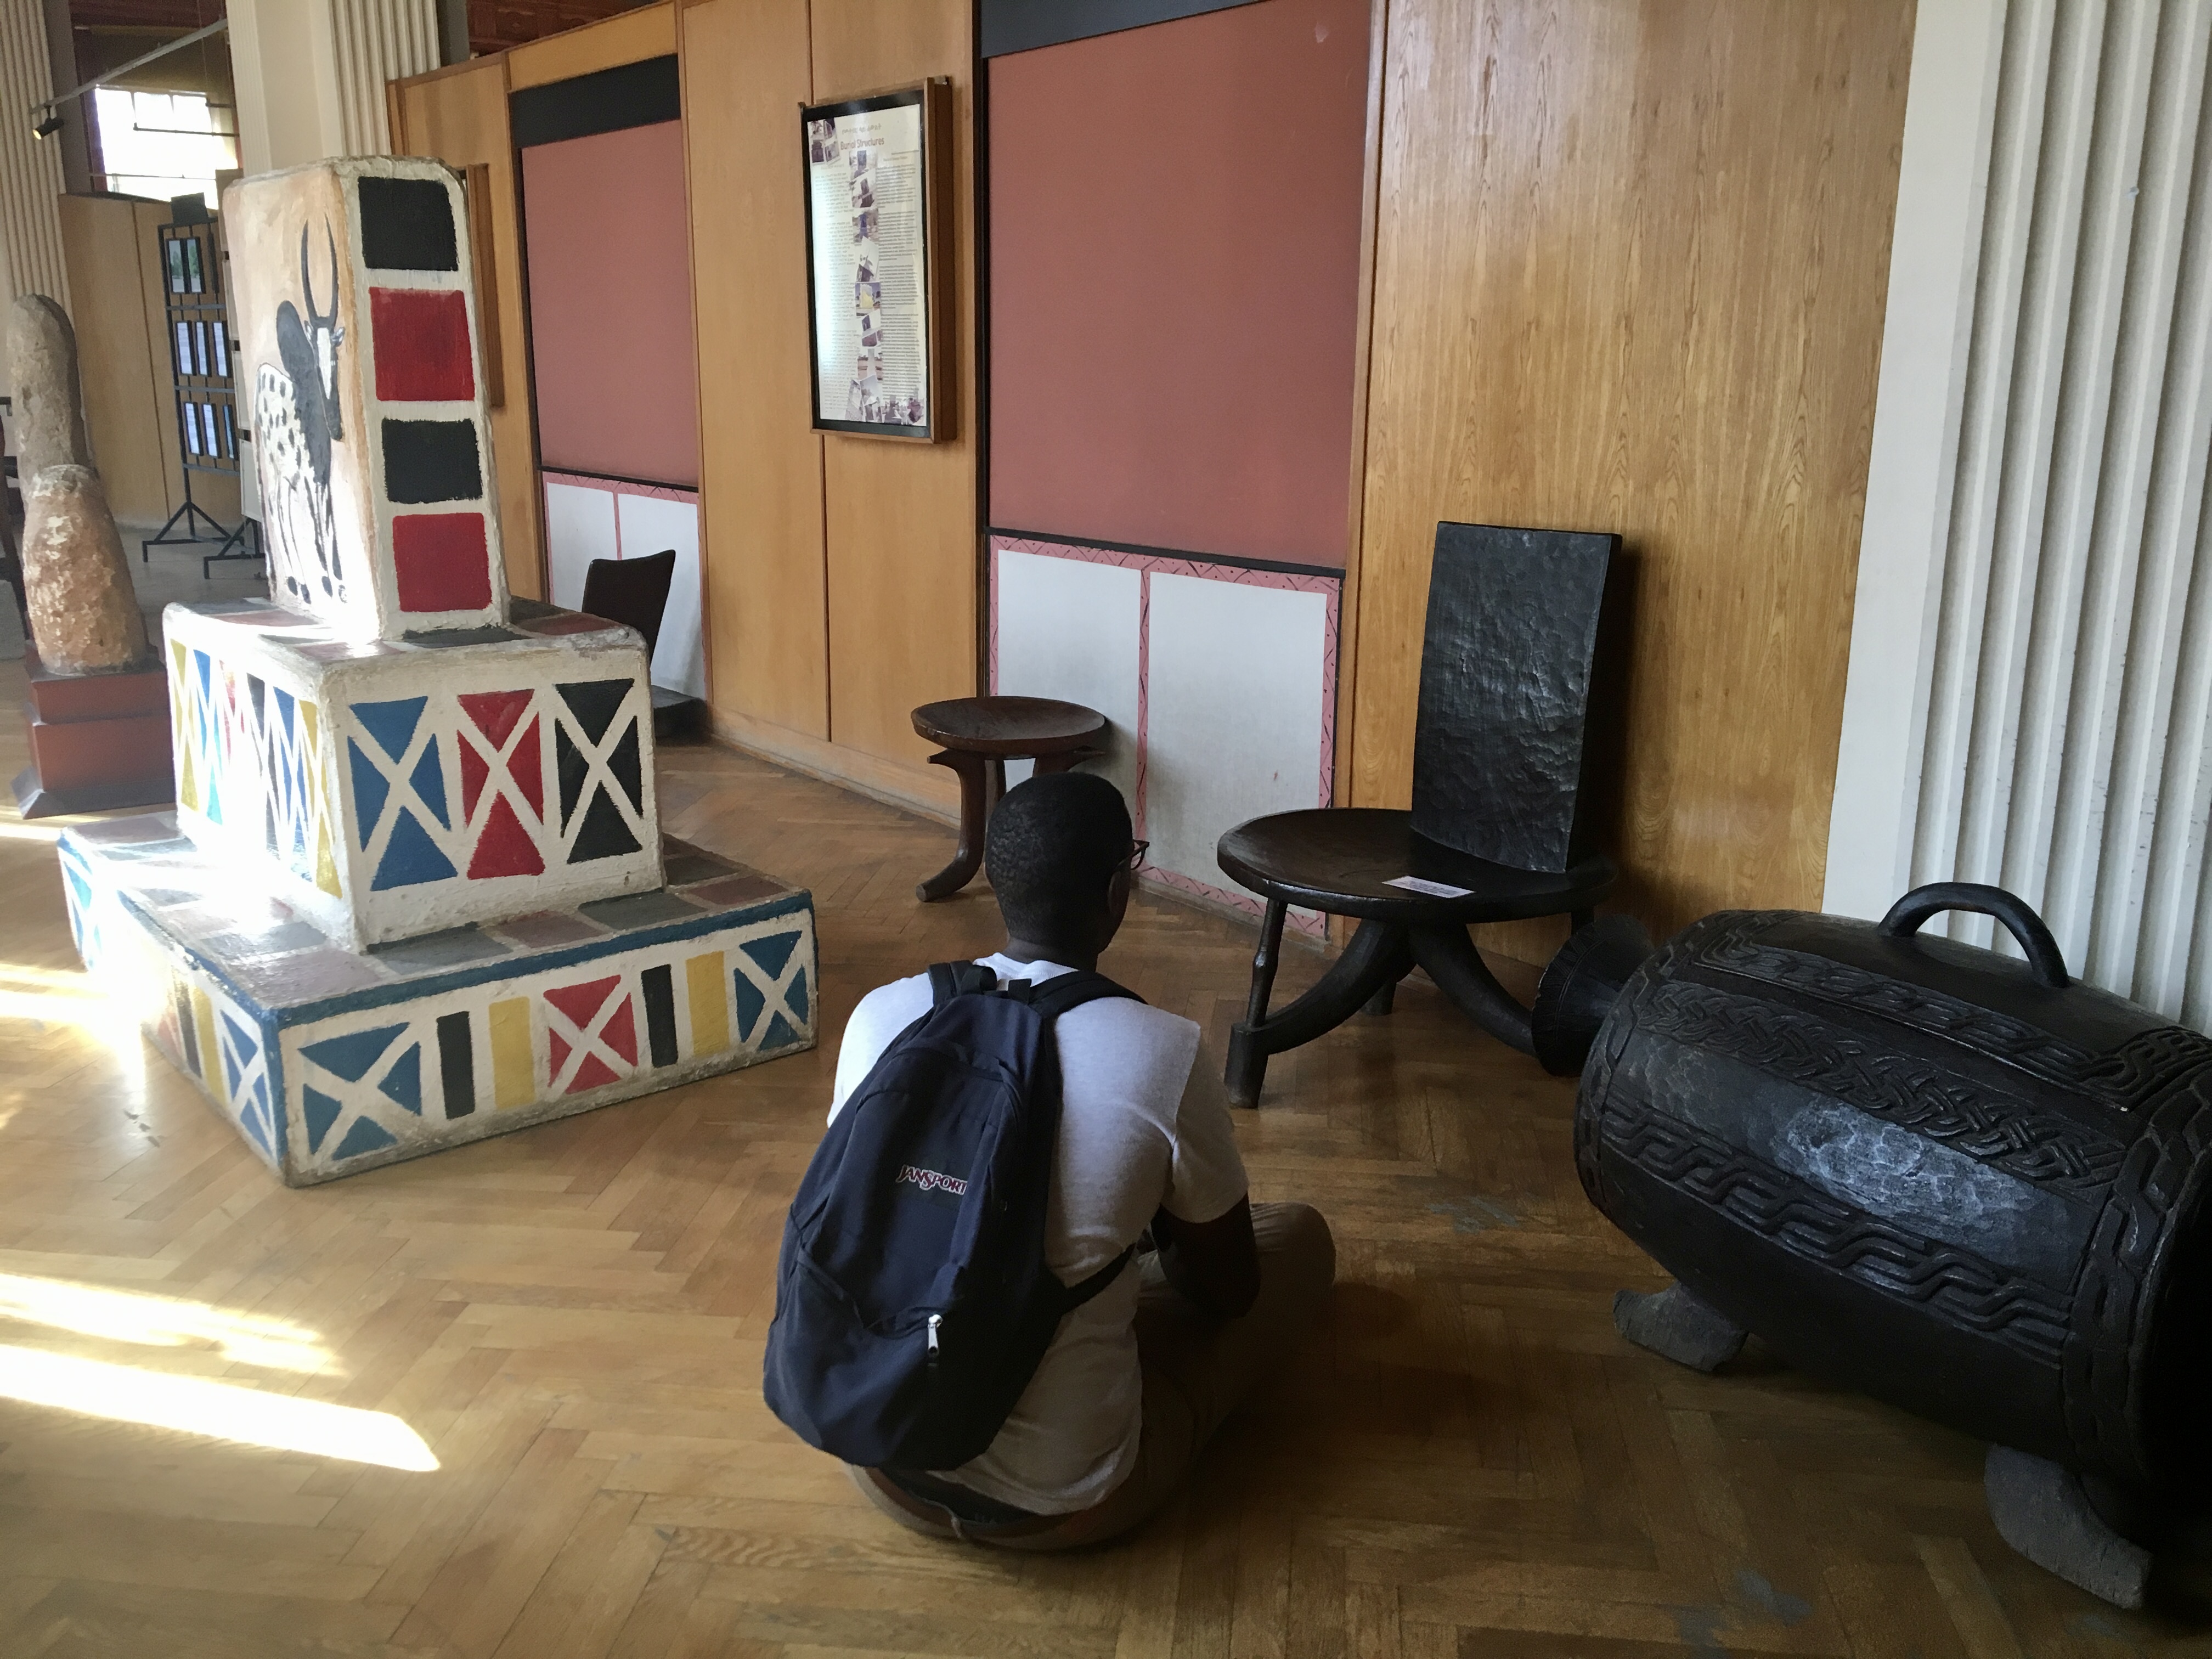 Robell sitting on the floor in a museum in Ethiopia to study a black, locally made chair. He is surrounded by sculptures.